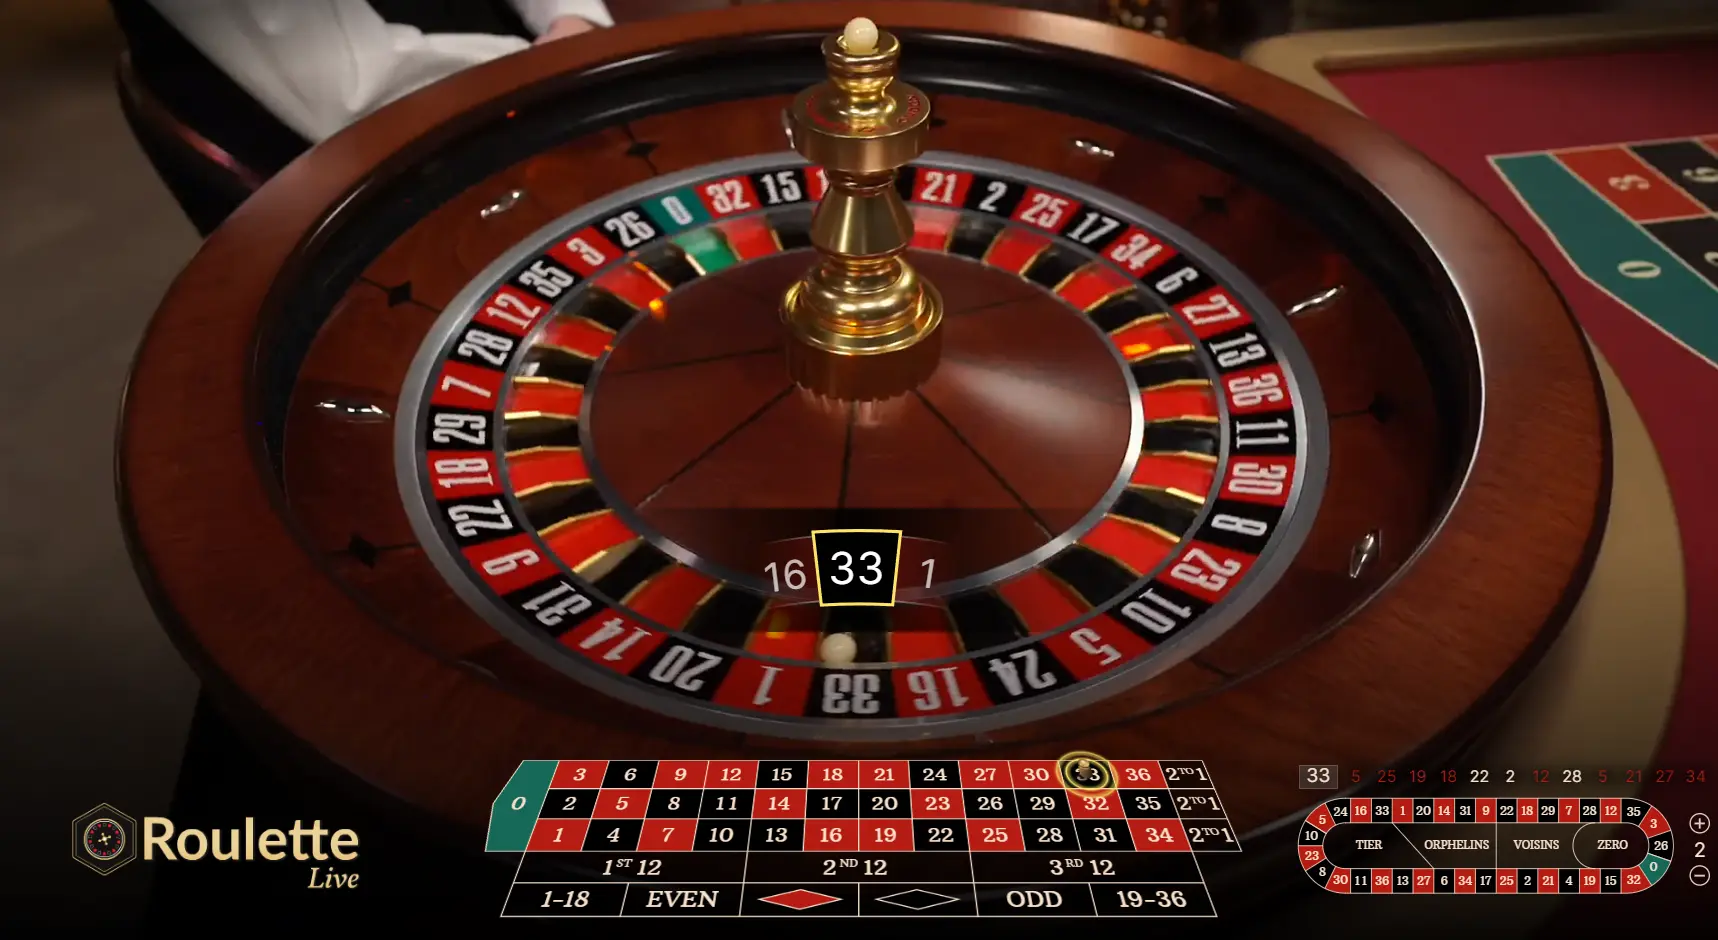 VIP Roulette was launched by a leading Swedish game developer, Evolution Gaming